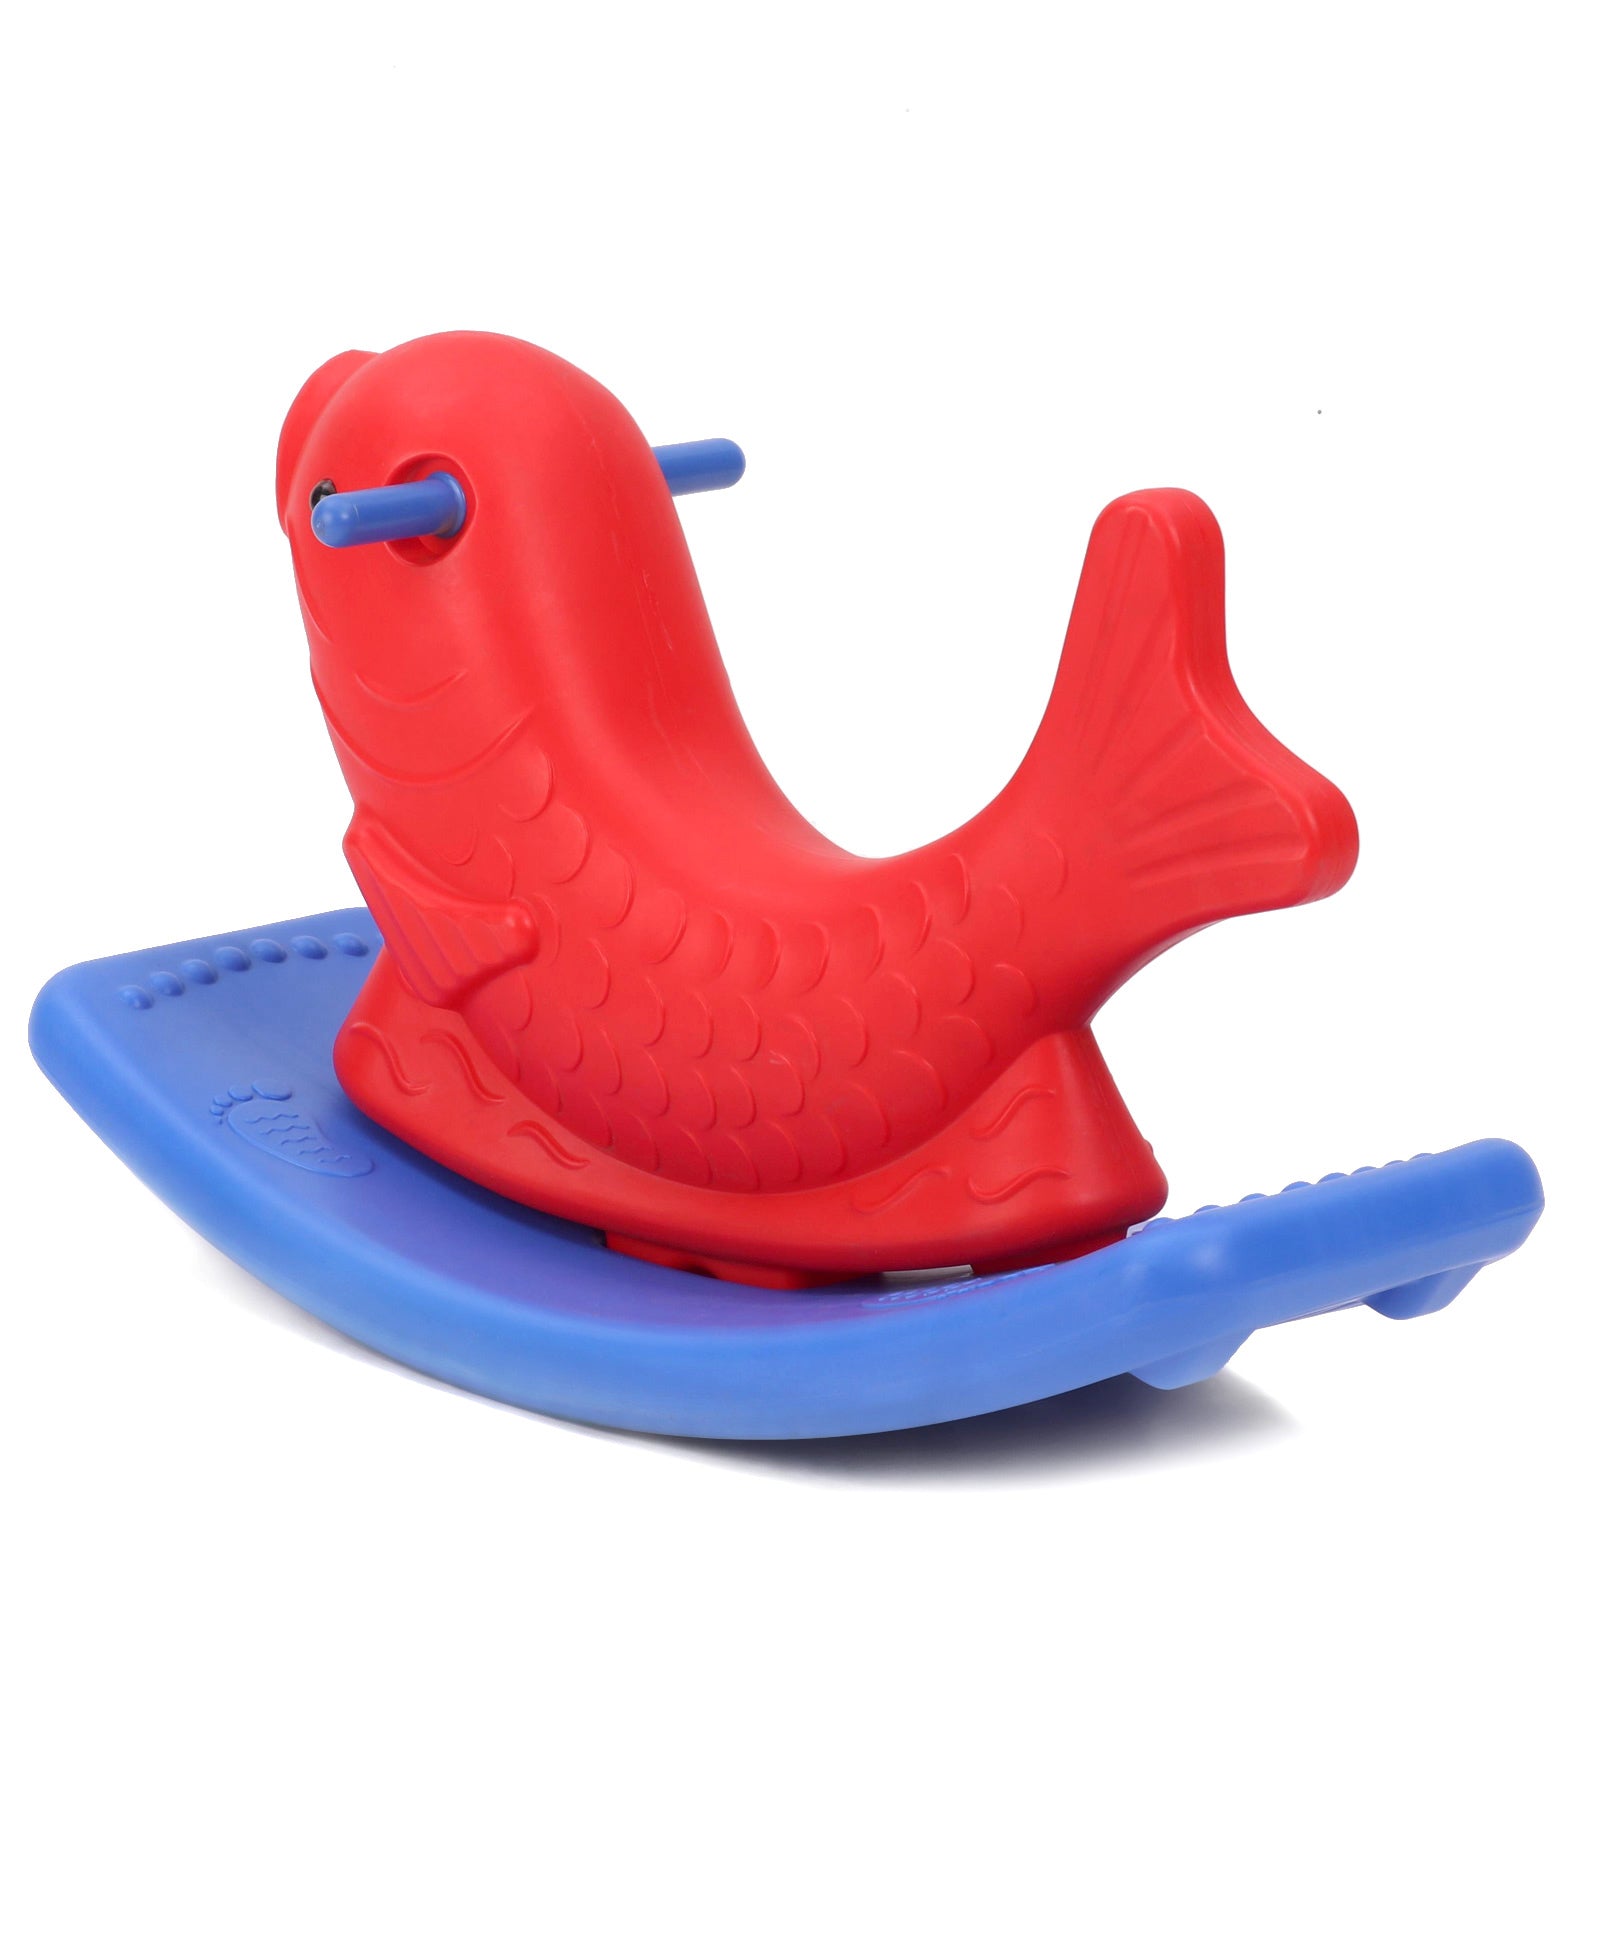 PATOYS | Ride-On Fish Rocker for Kids Baby Rocking Ride on toys Multicolor - PATOYS